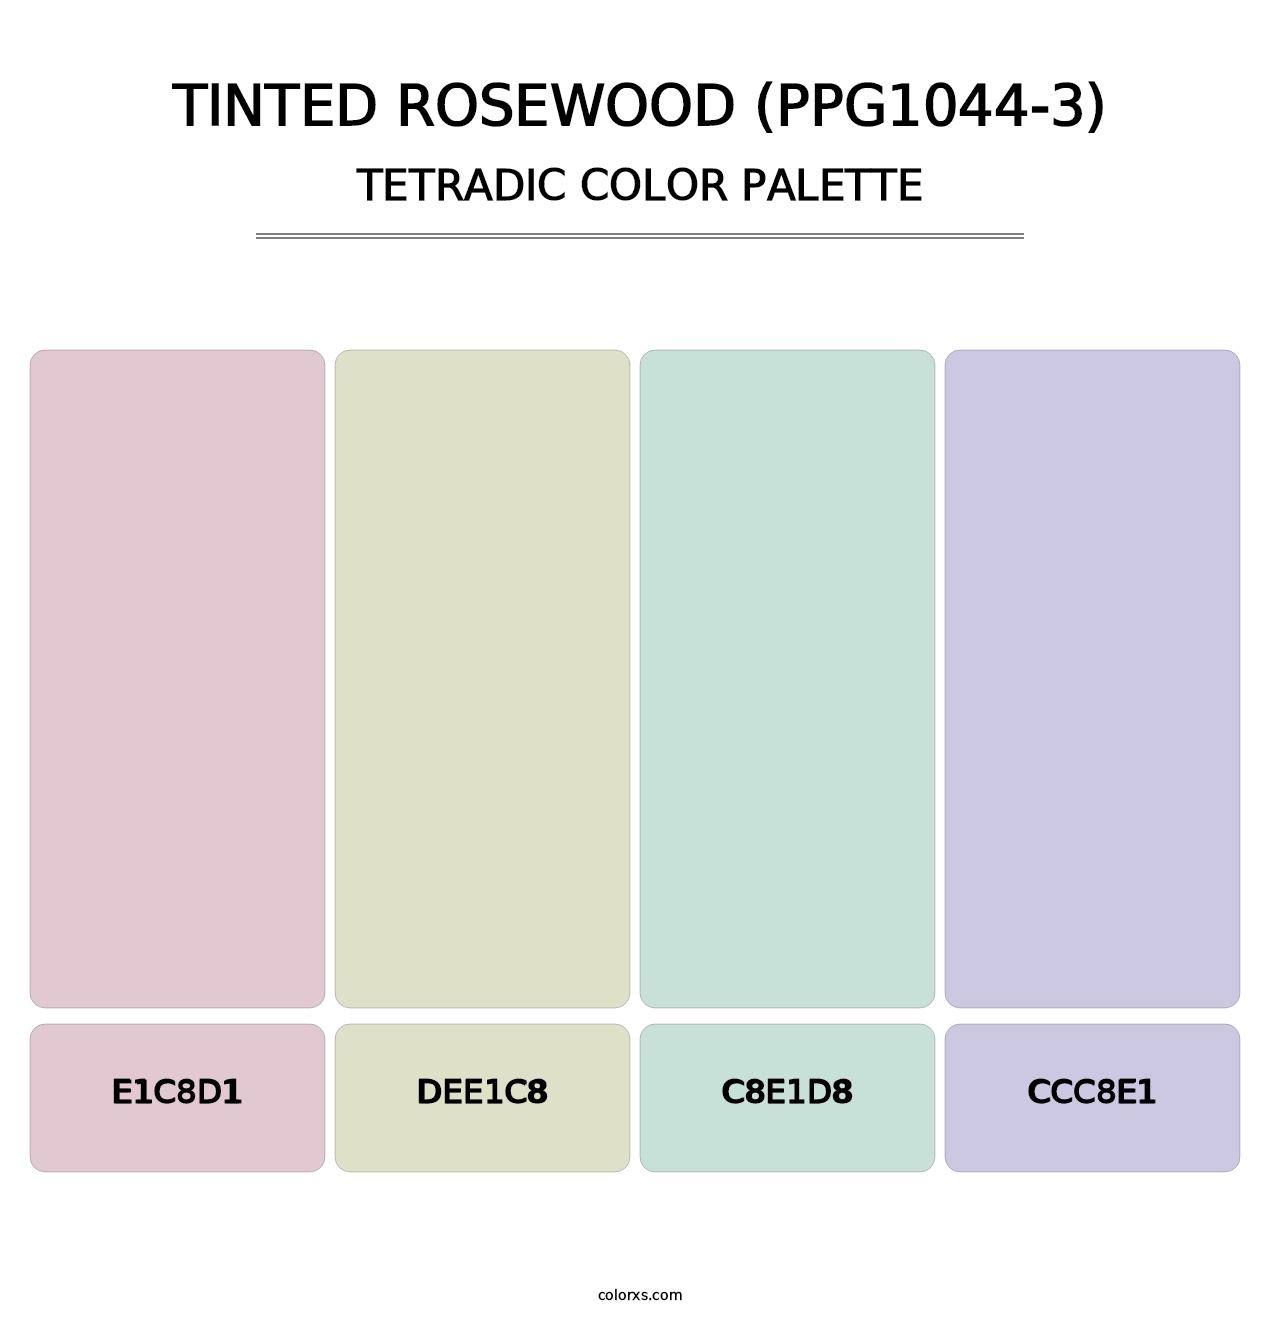 Tinted Rosewood (PPG1044-3) - Tetradic Color Palette